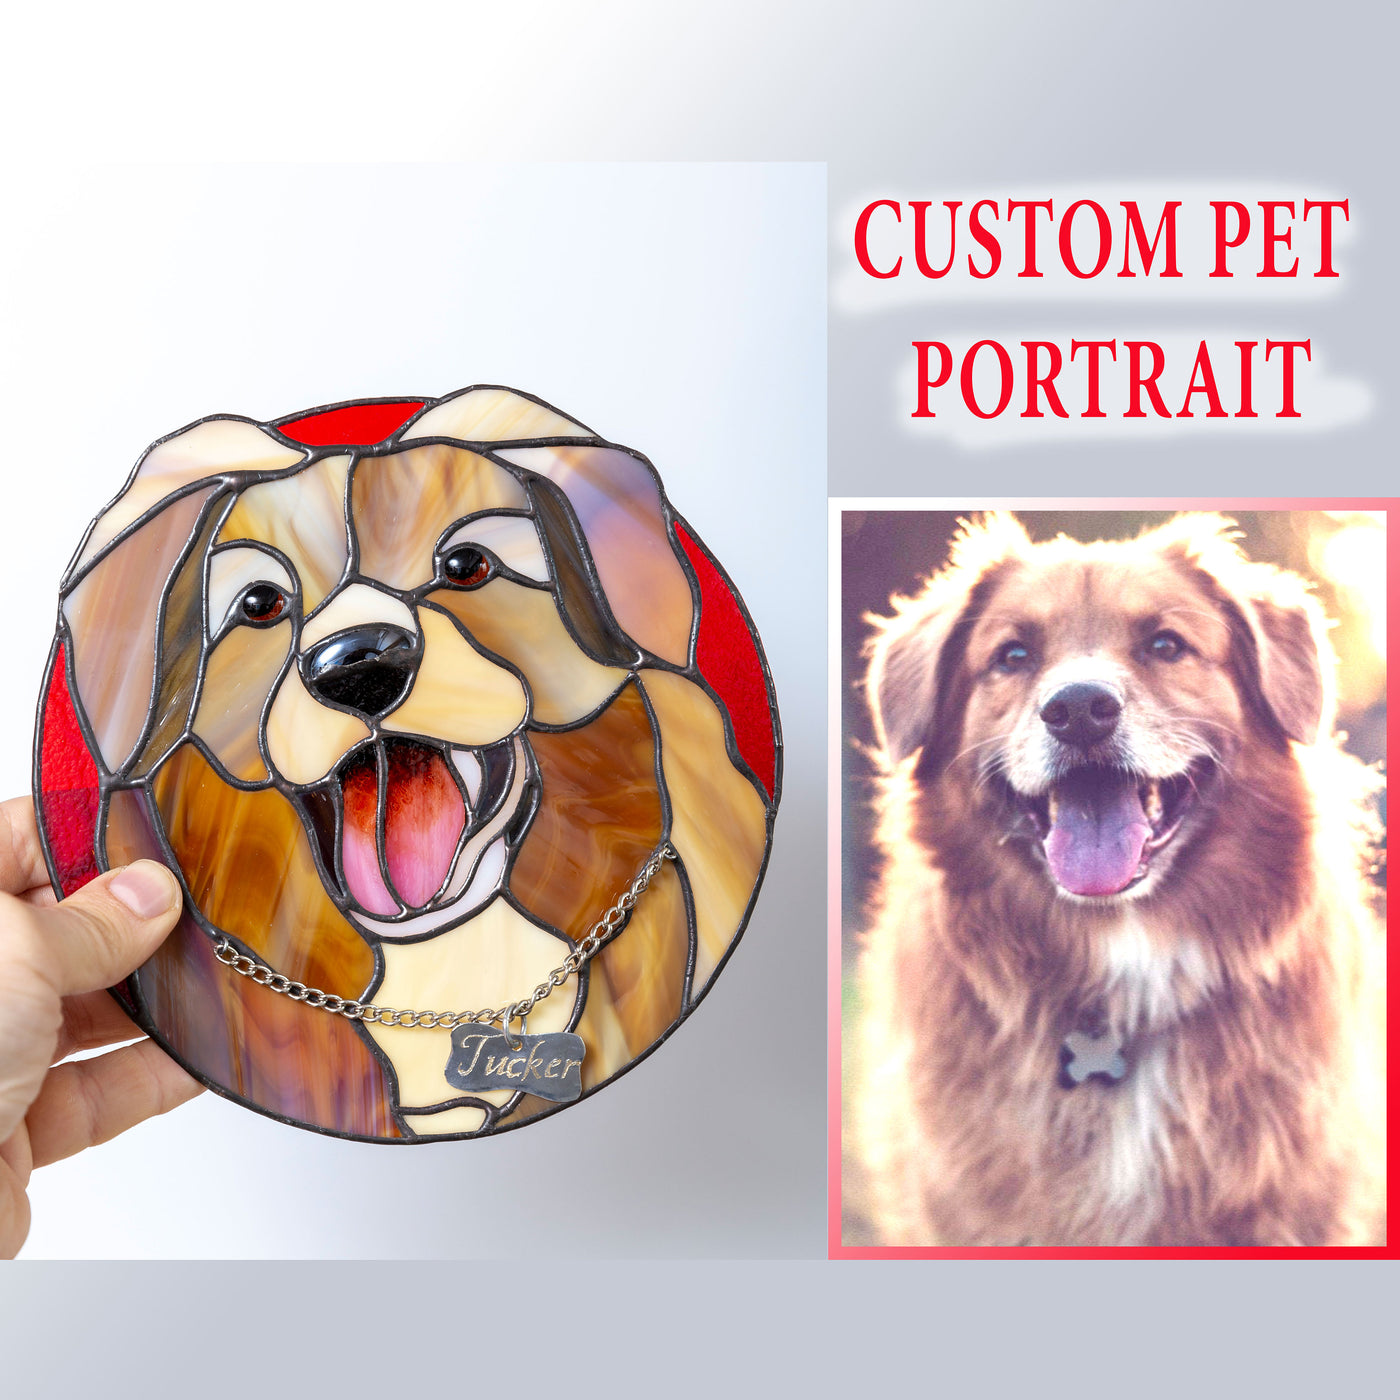 Stained glass portrait of a dog in a round red frame for home decor